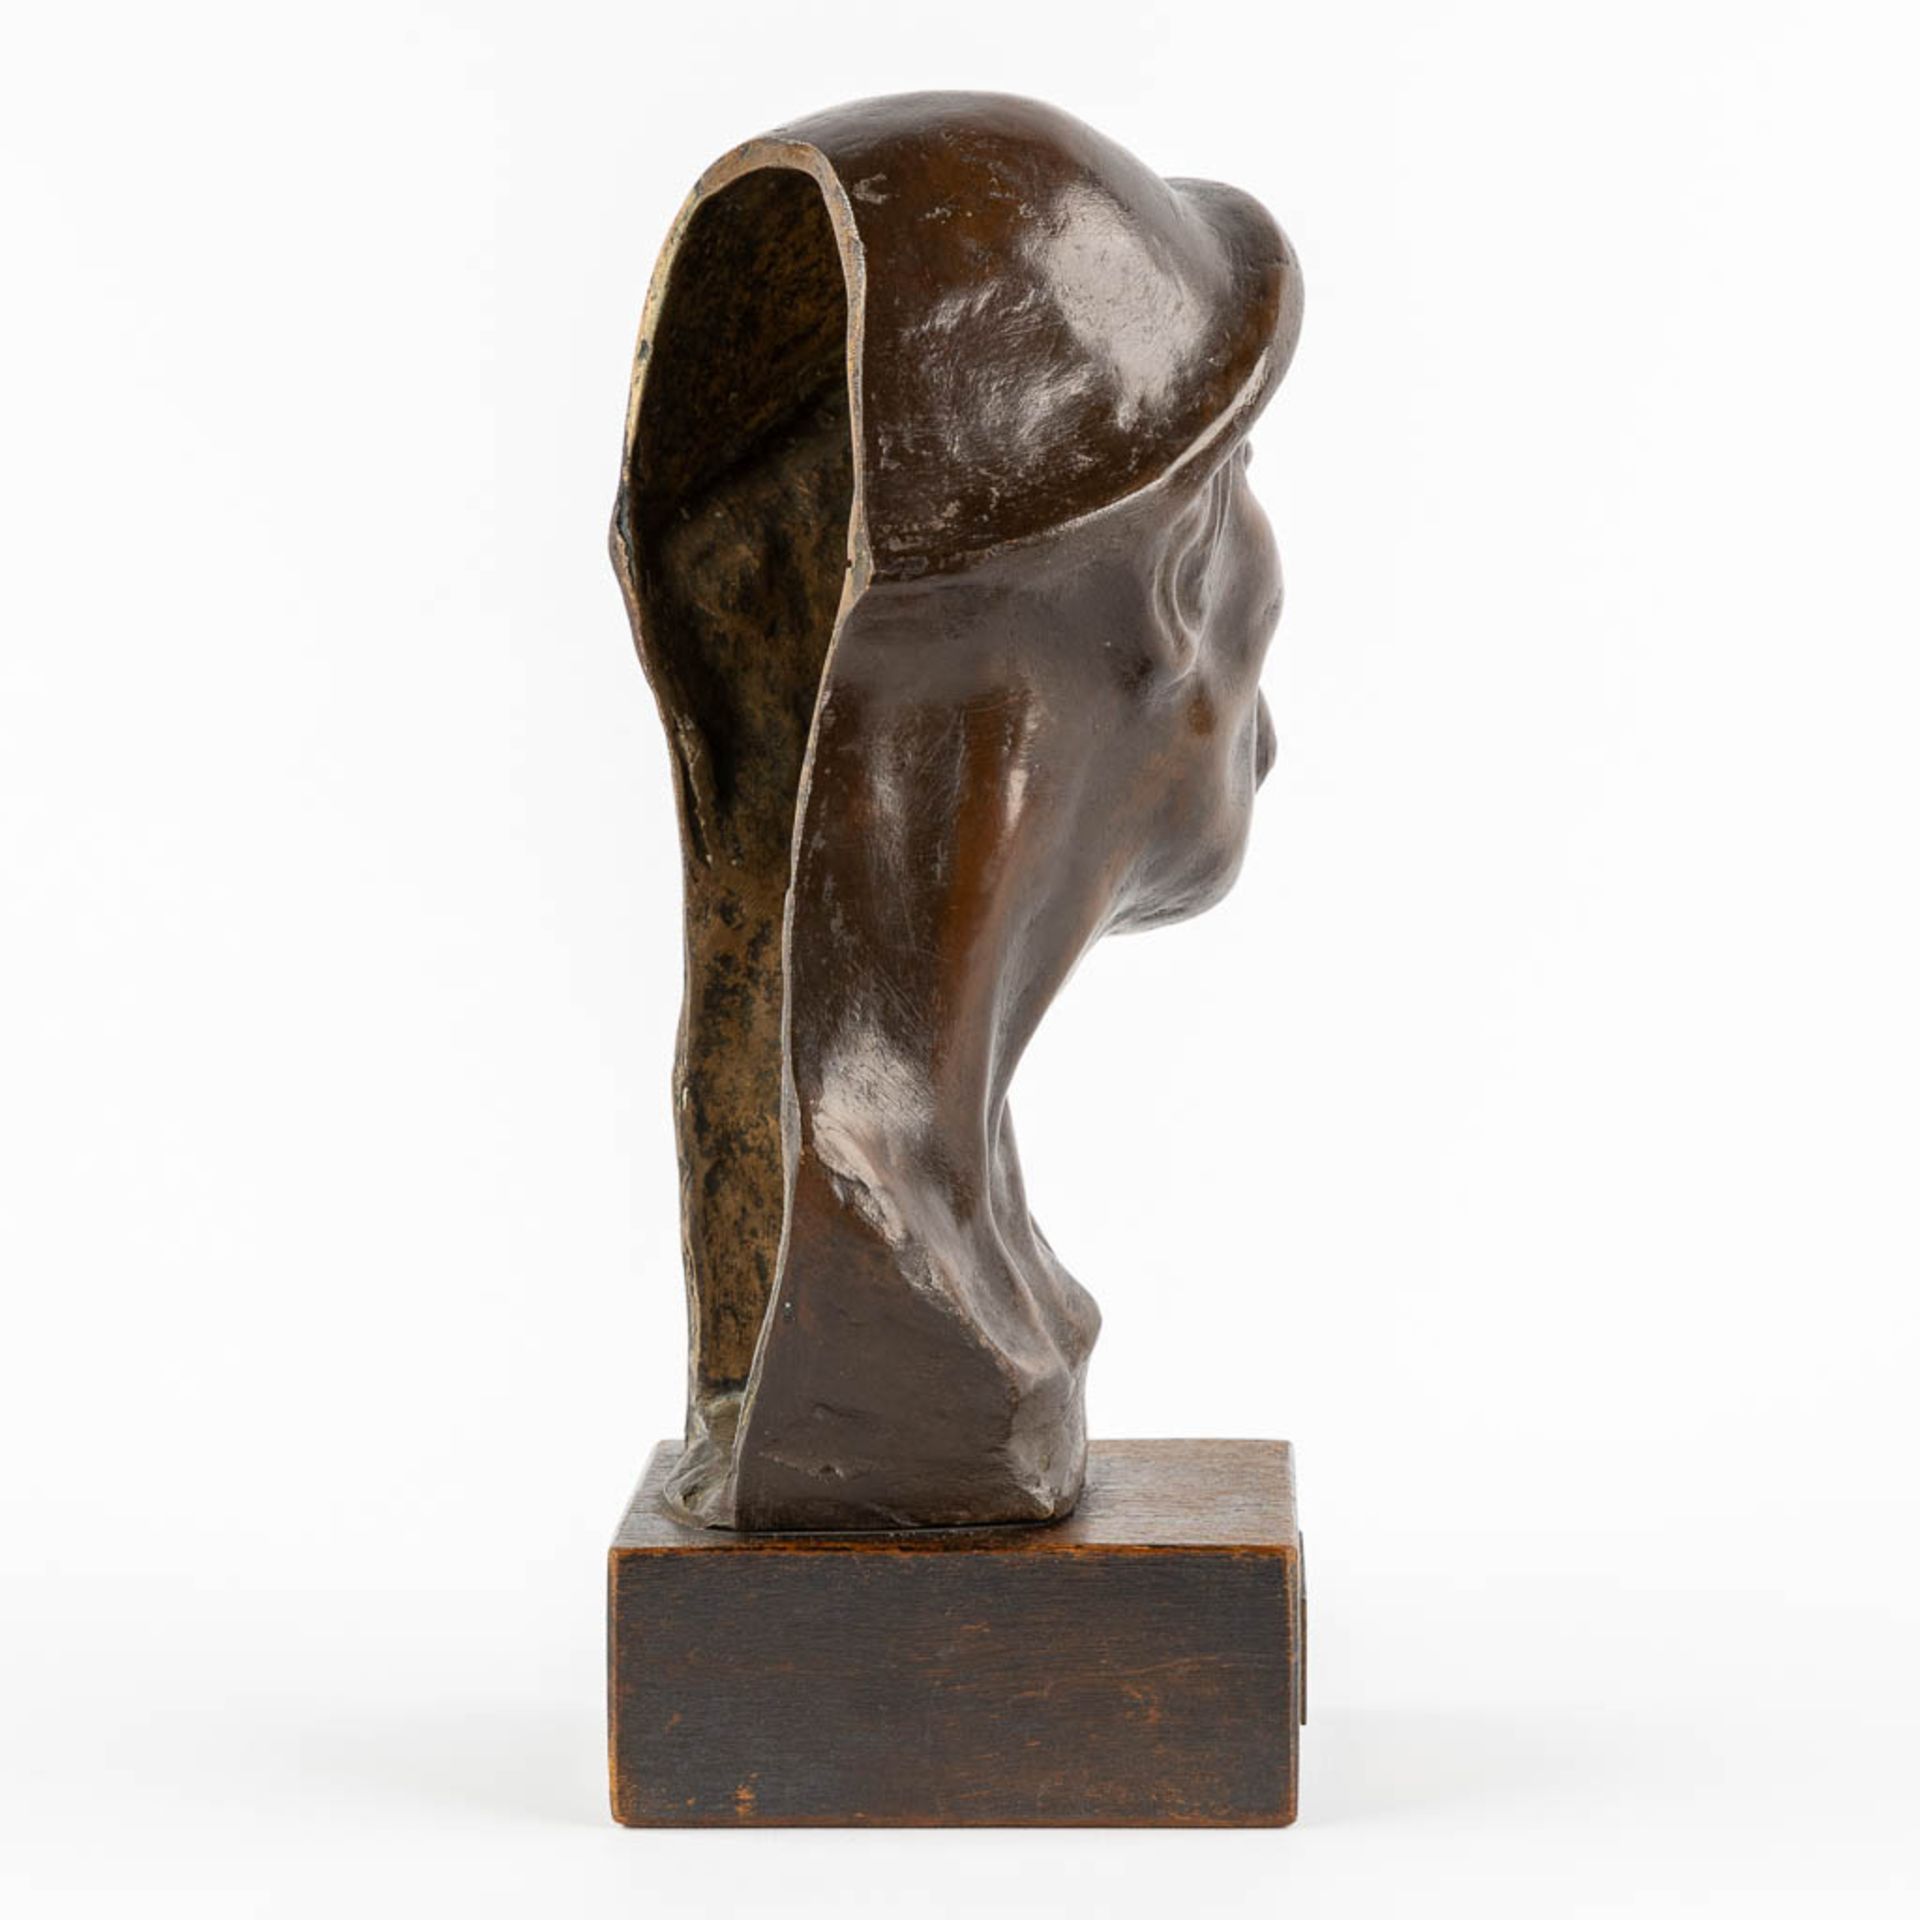 Georges WASTERLAIN (1889-1963) 'Mineur' patinated bronze. (L:11 x W:13 x H:26,5 cm) - Image 4 of 11